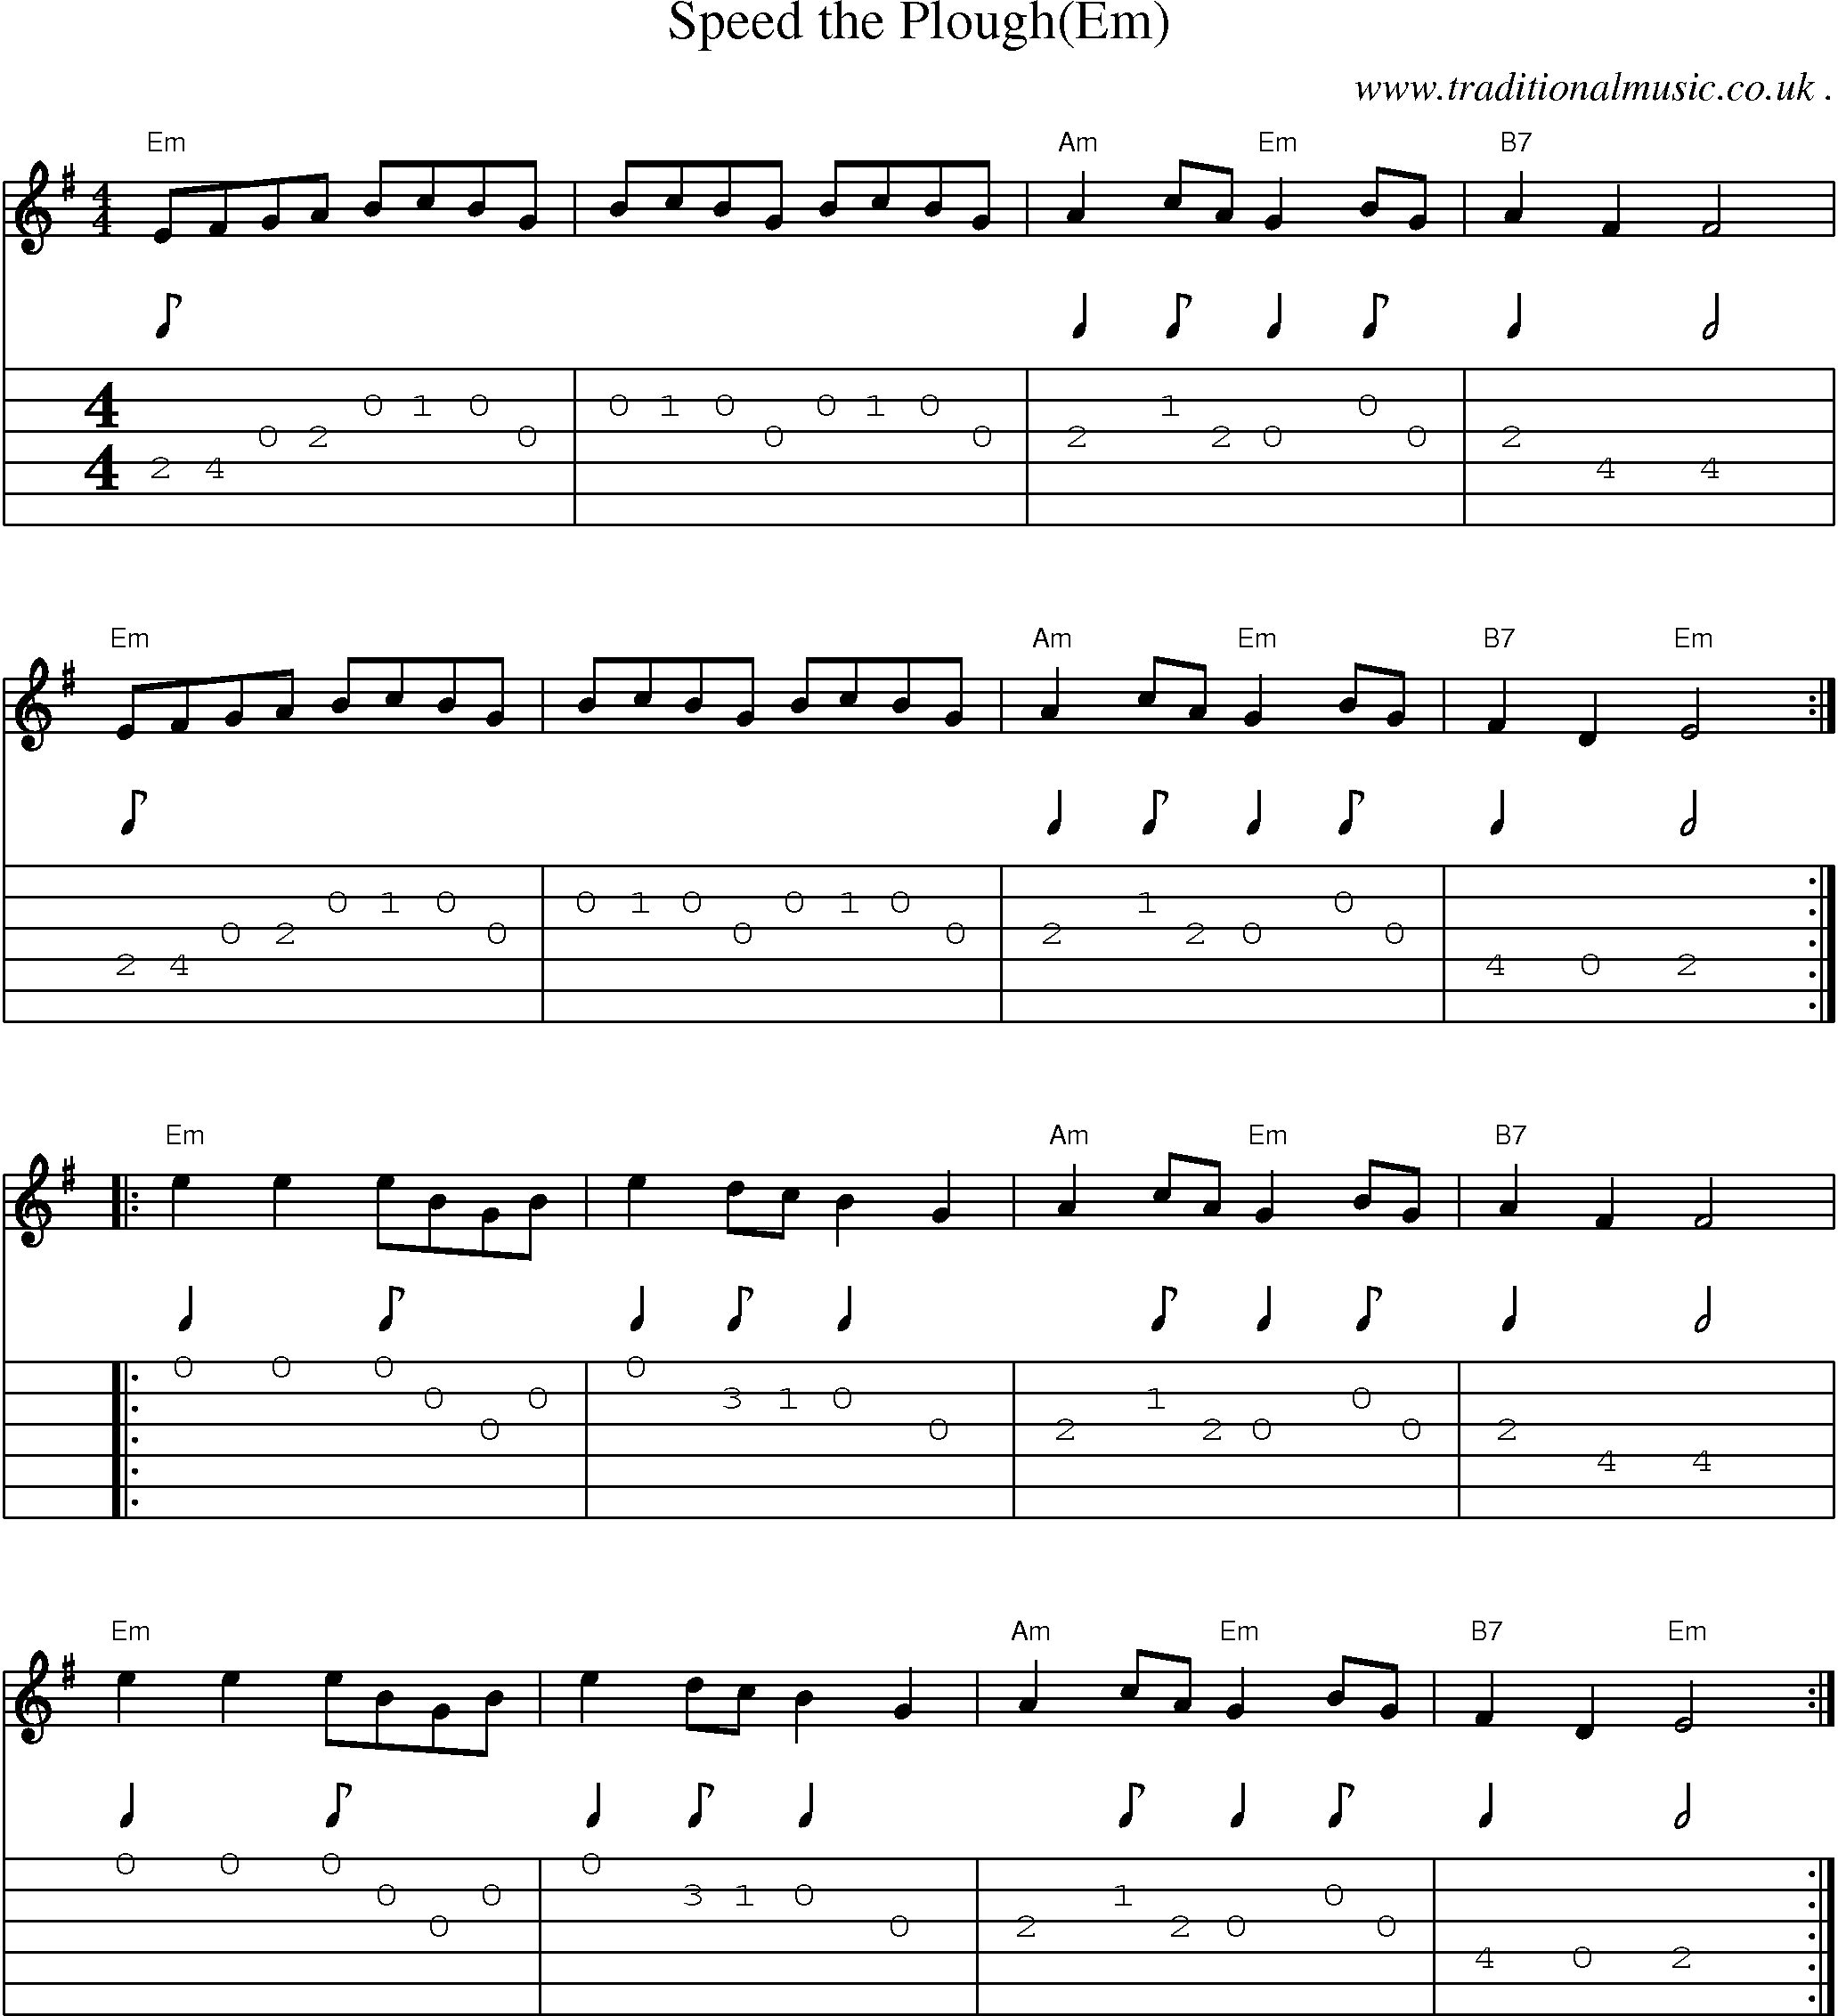 Music Score and Guitar Tabs for Speed the Plough(Em)